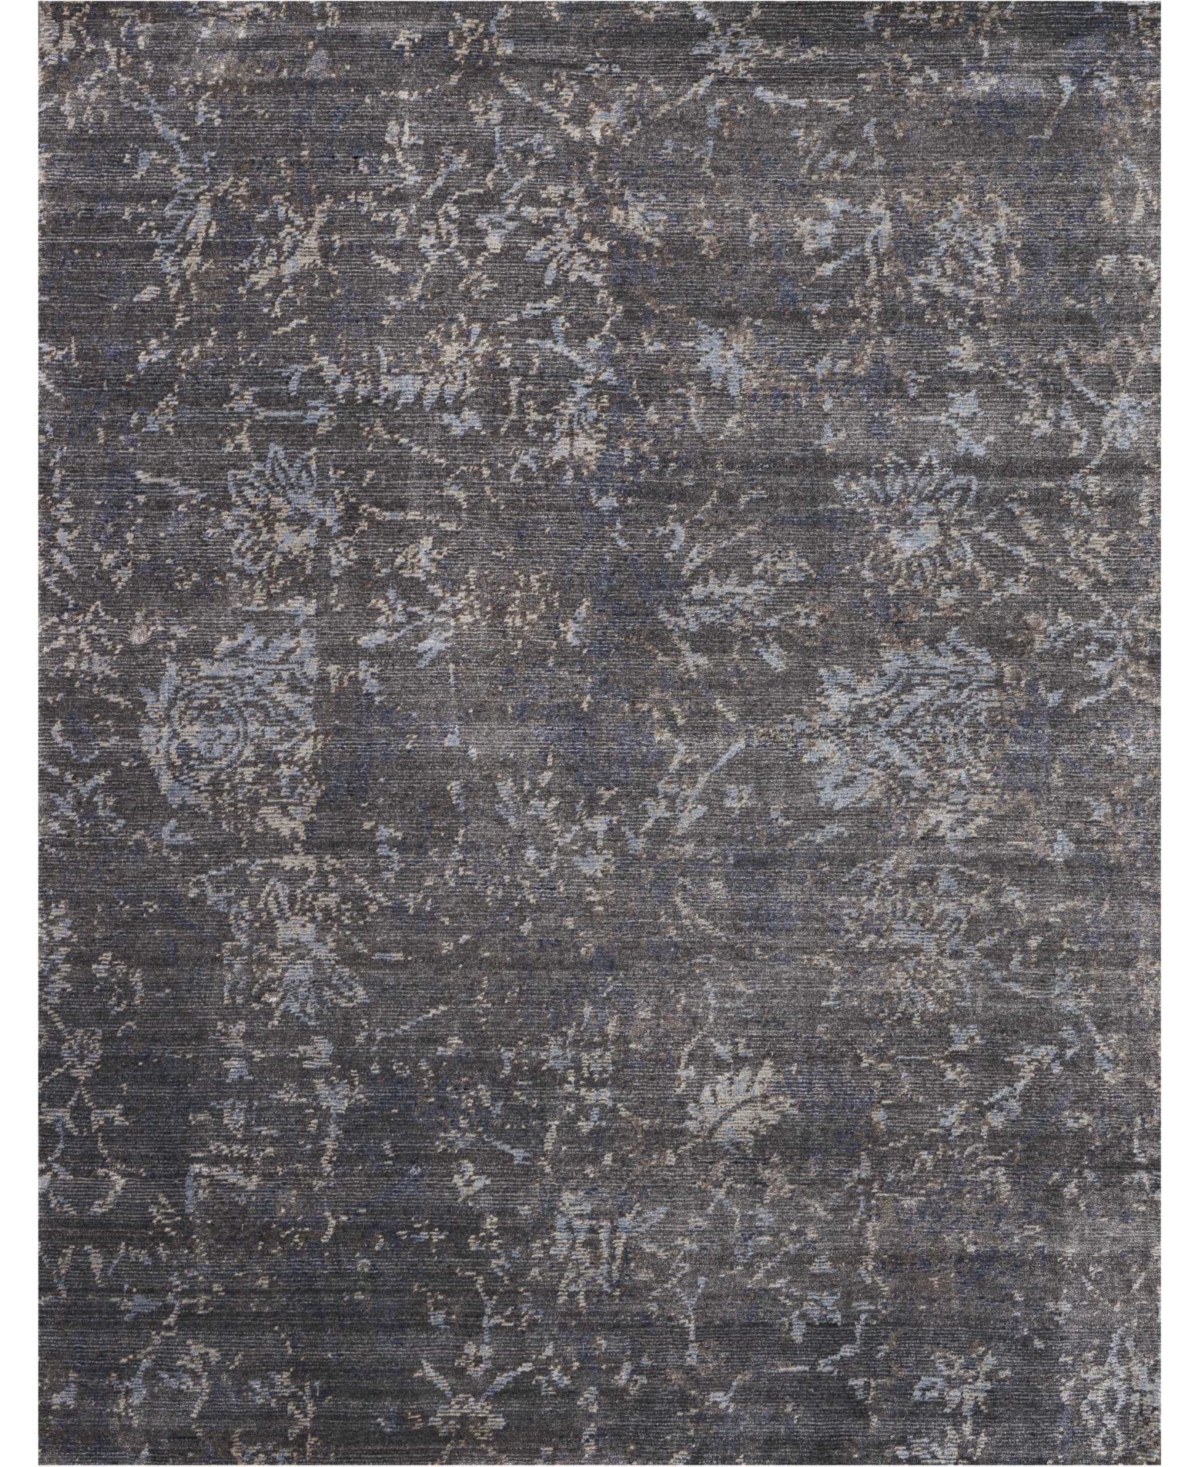 Nourison Home Lucent LCN04 Charcoal 5'6in x 7'6in Area Rug - Charcoal